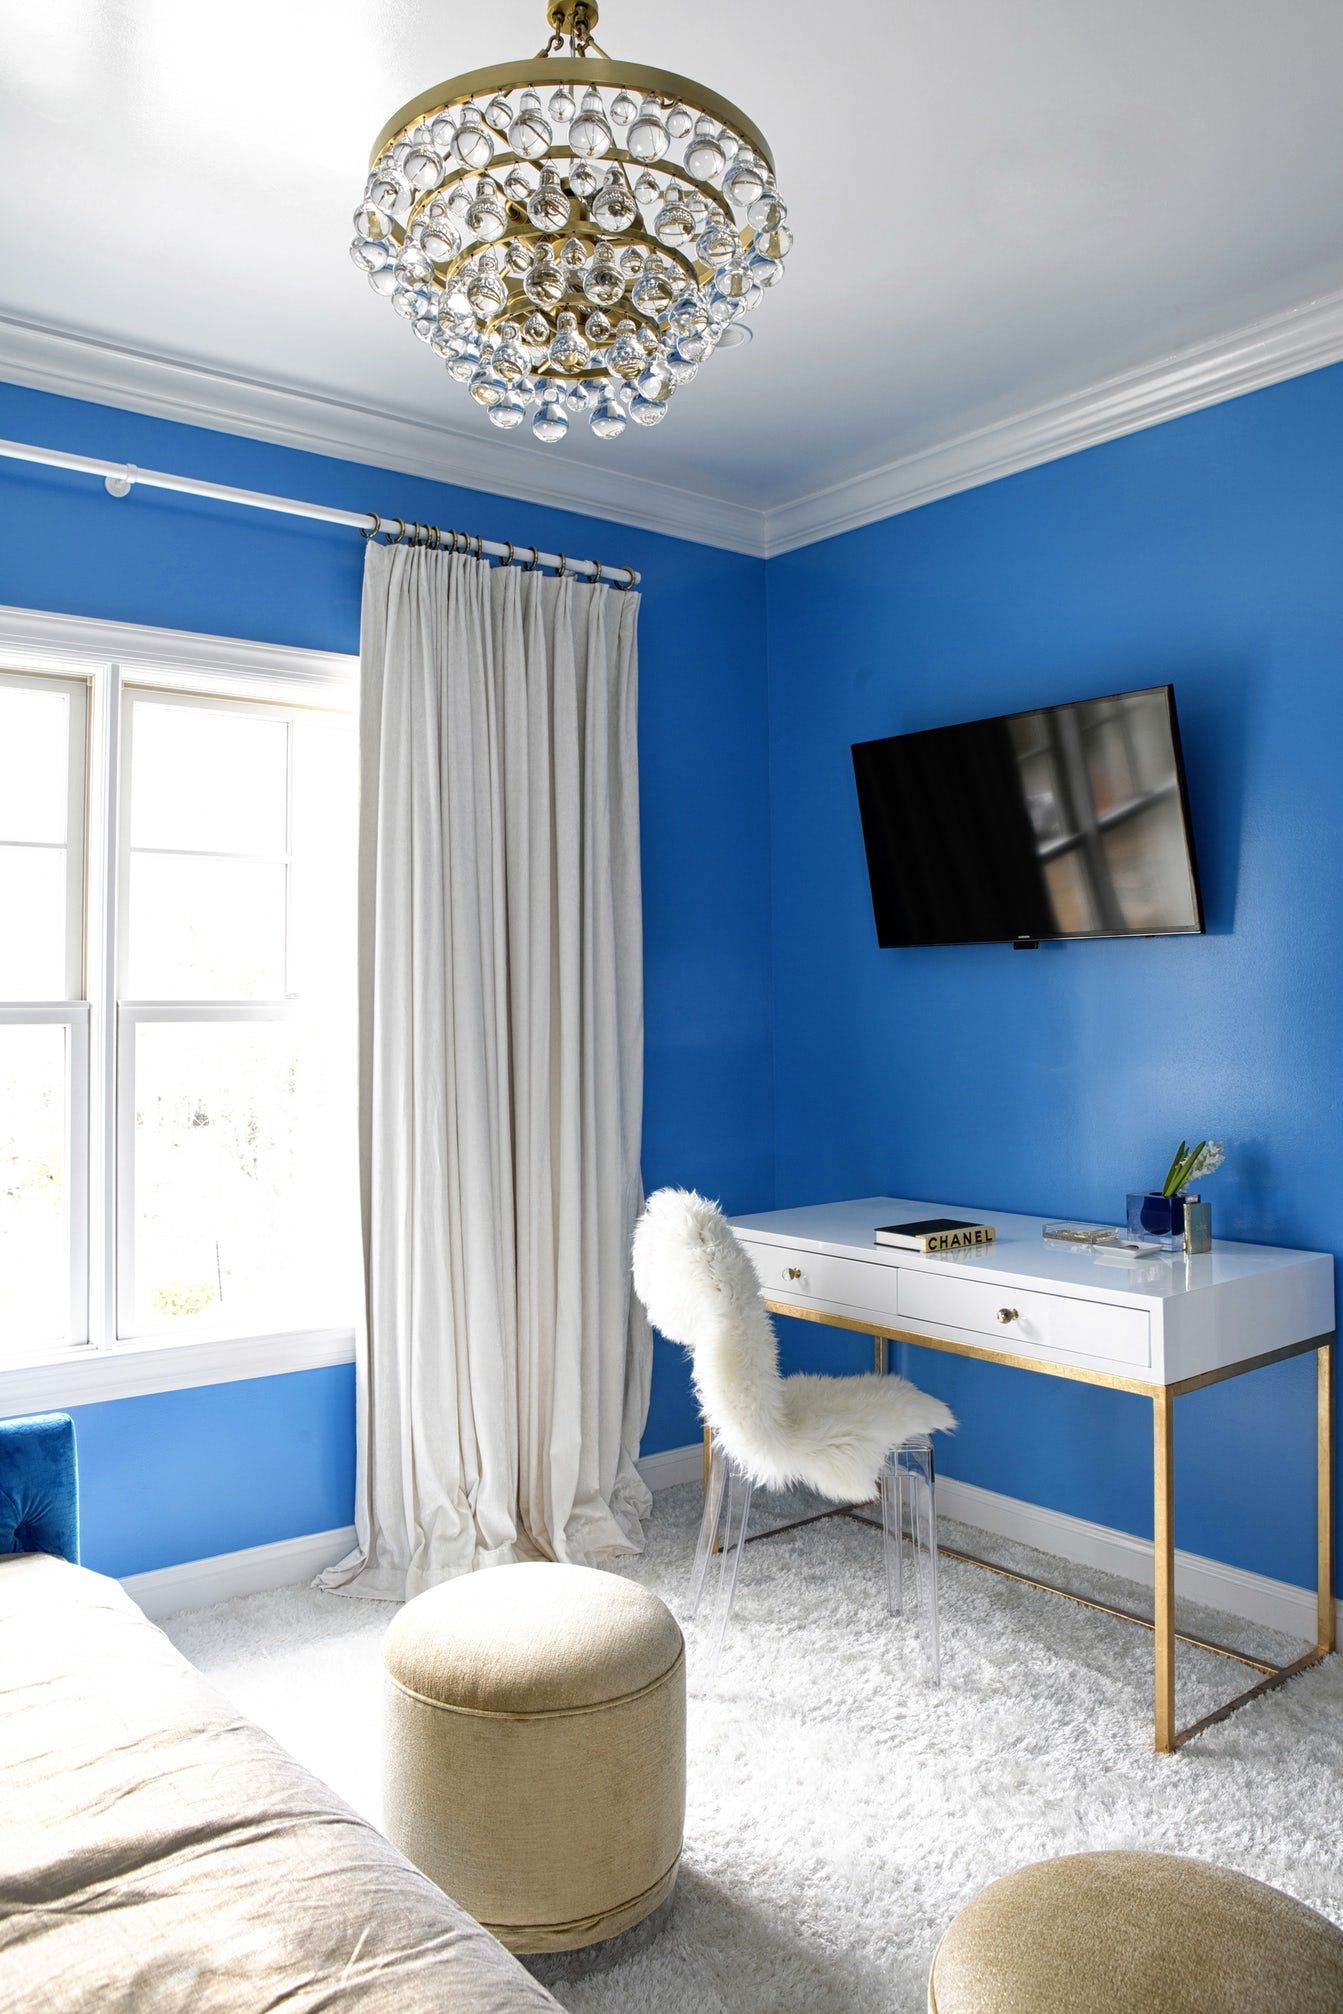 12 Vibrant Room Color Ideas - How to Decorate With Bright Colors